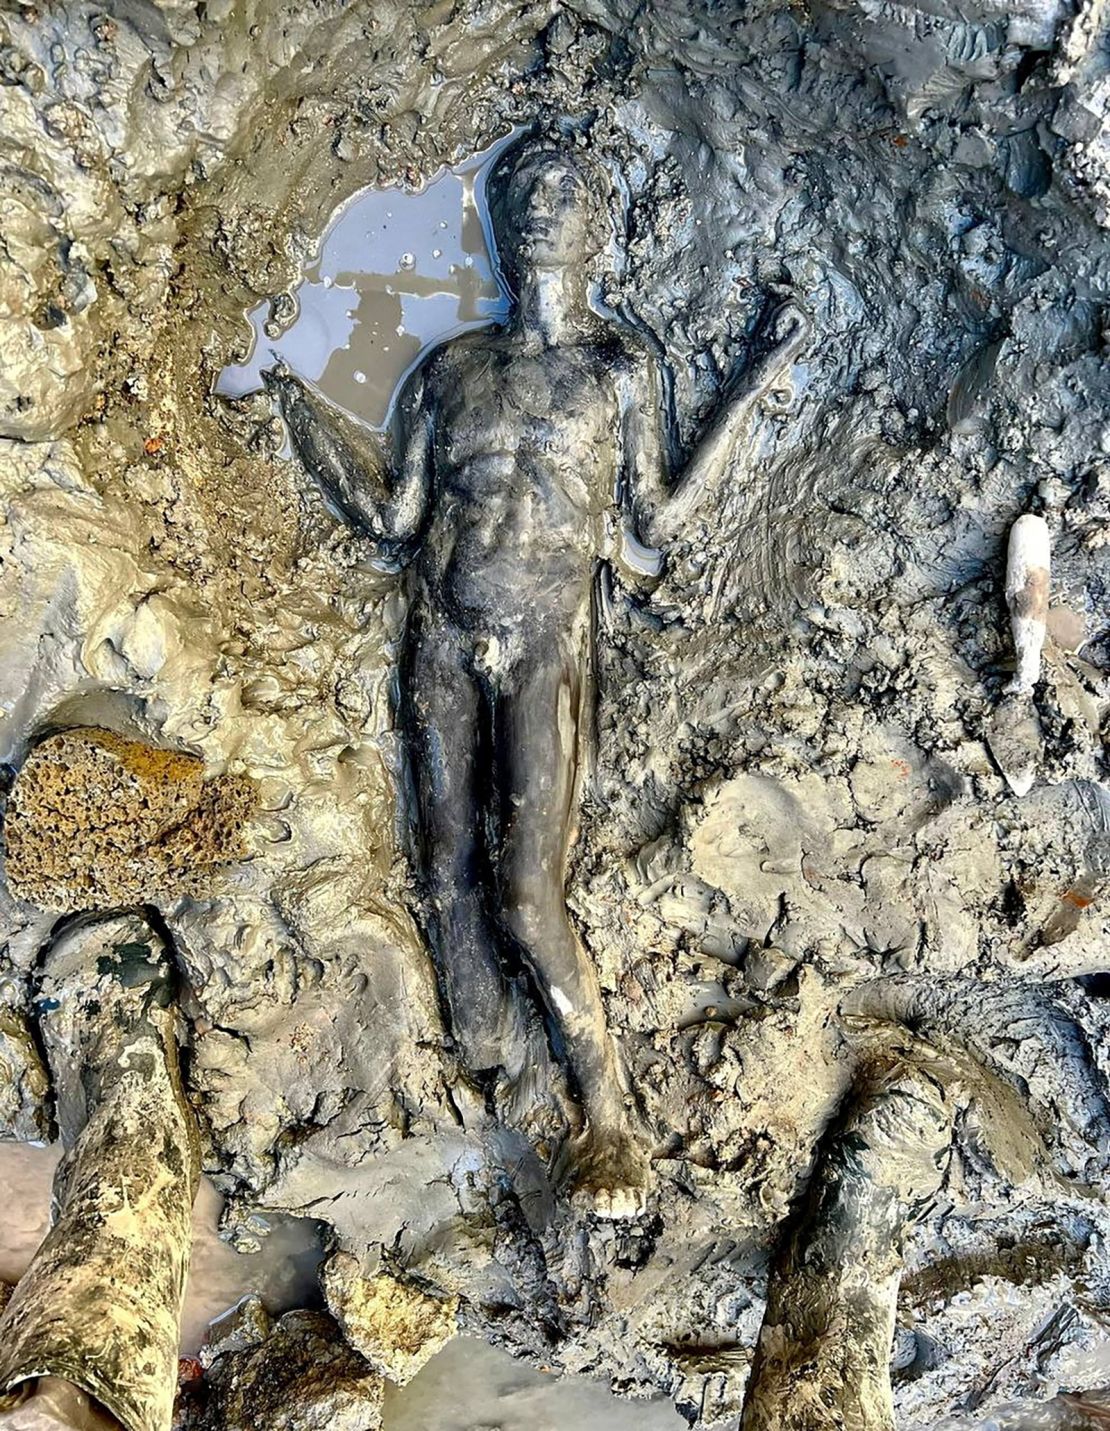 A newly discovered 2,300-year-old bronze statue lies on the ground in San Casciano dei Bagni, Italy.